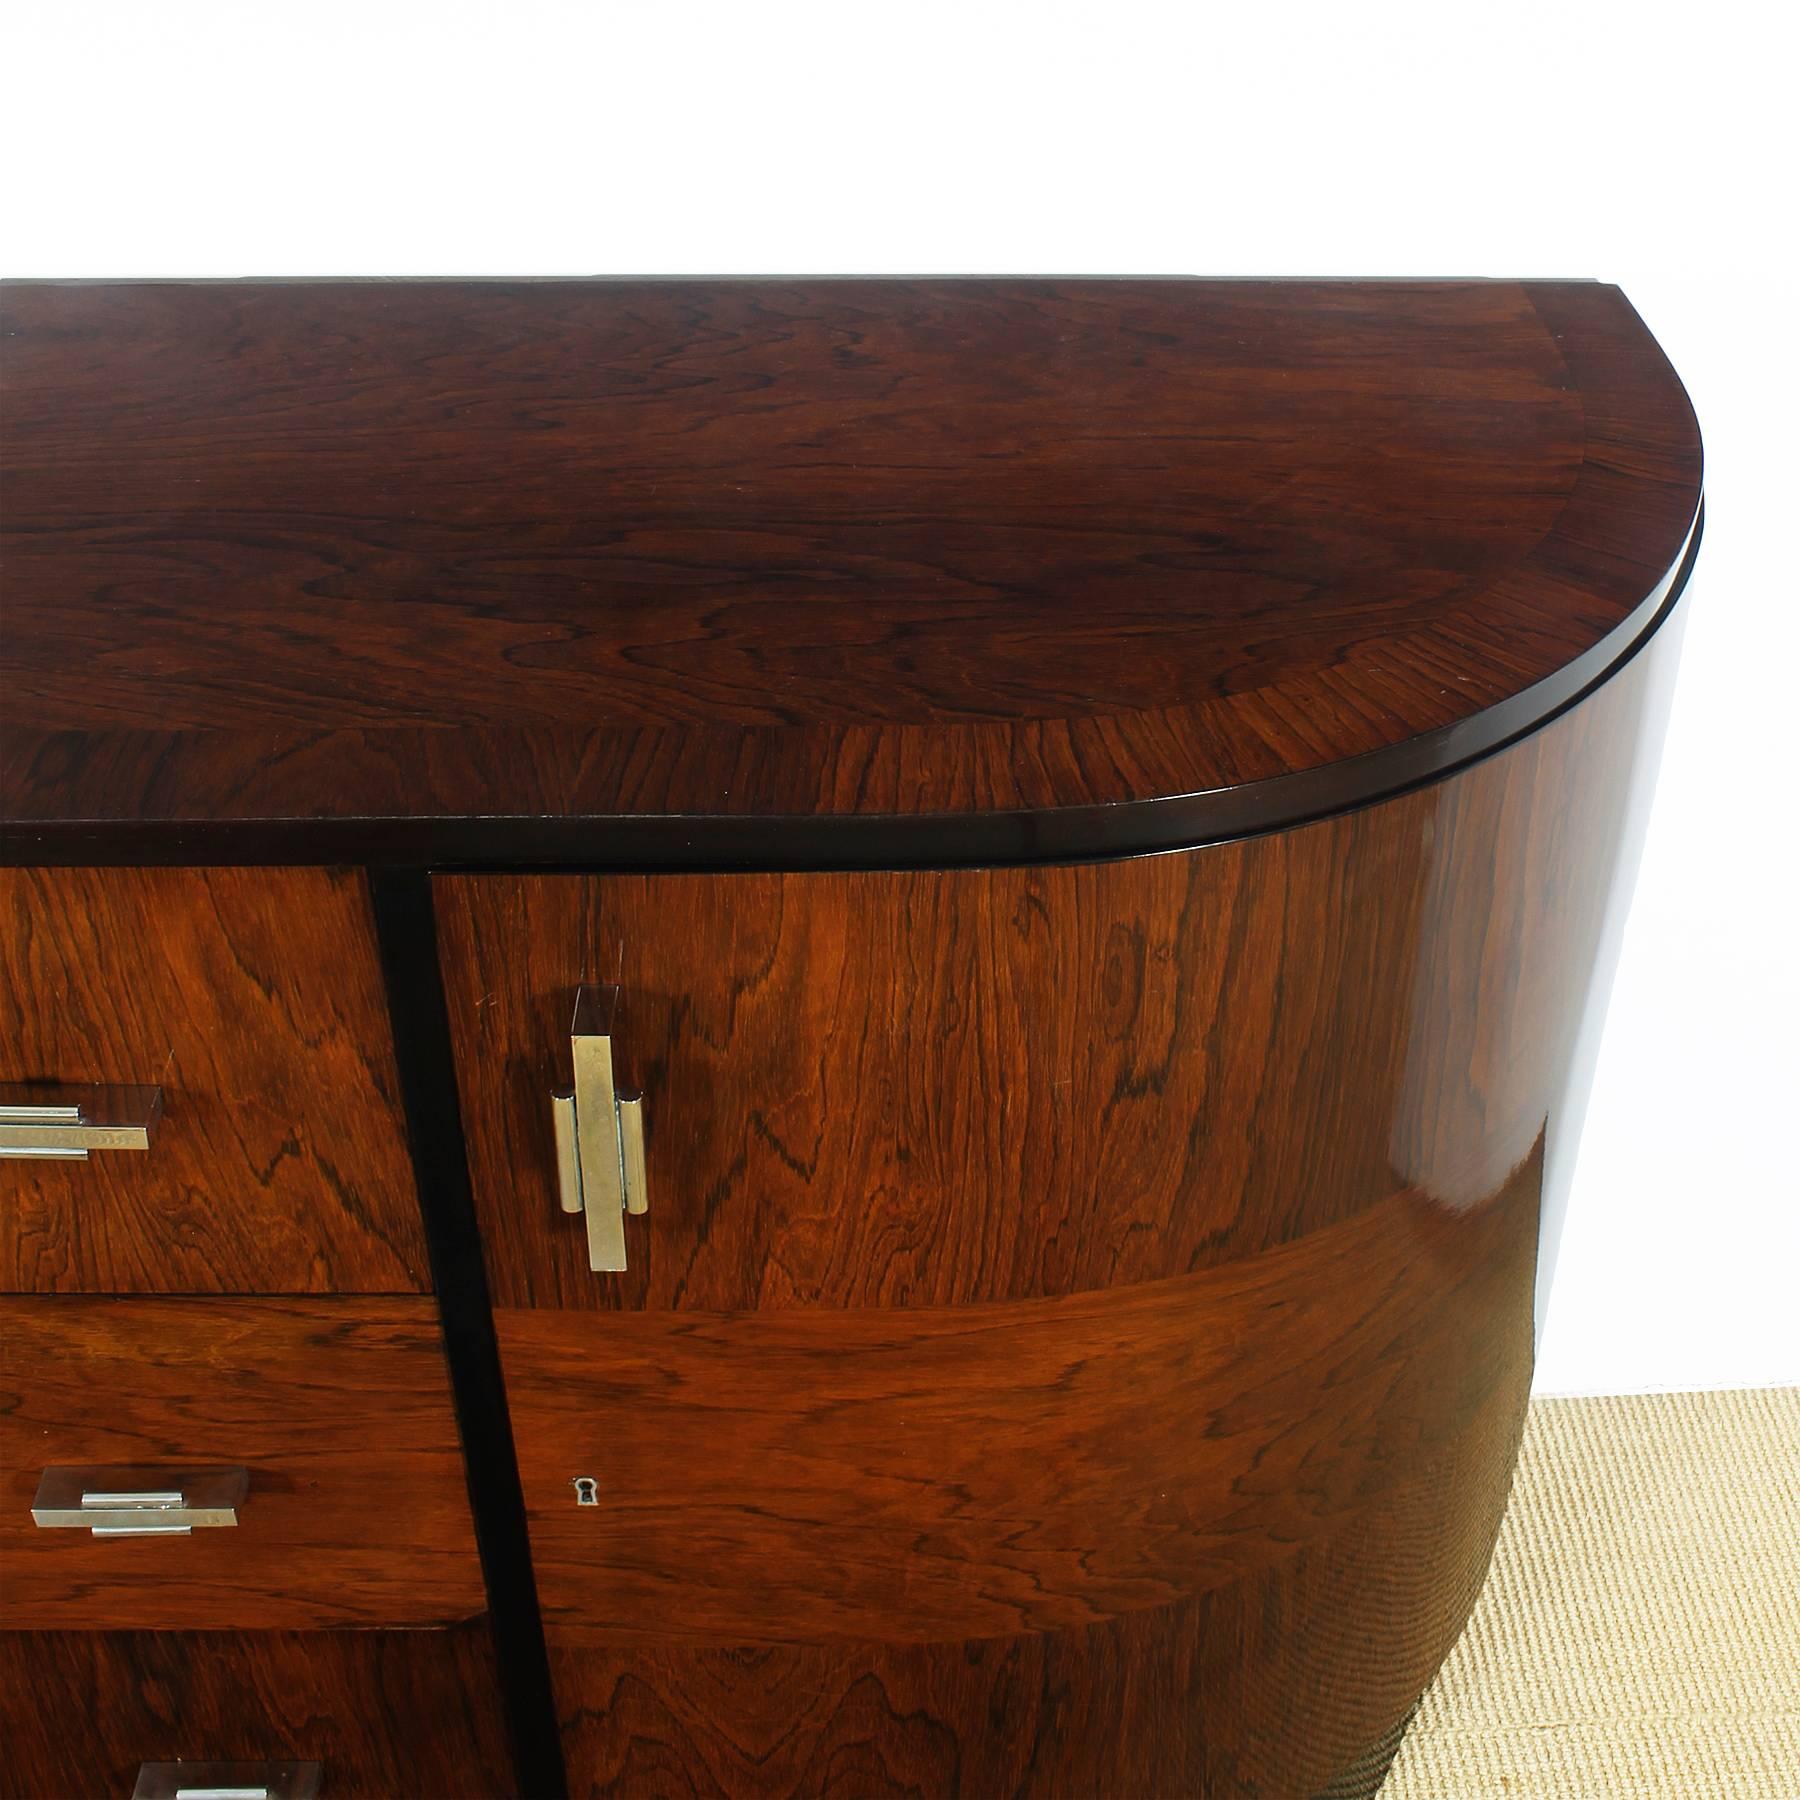 Mid-20th Century 1934 - Curved Art Deco Sideboard by Casa Reig, mahogany, Rio rosewood - Spain